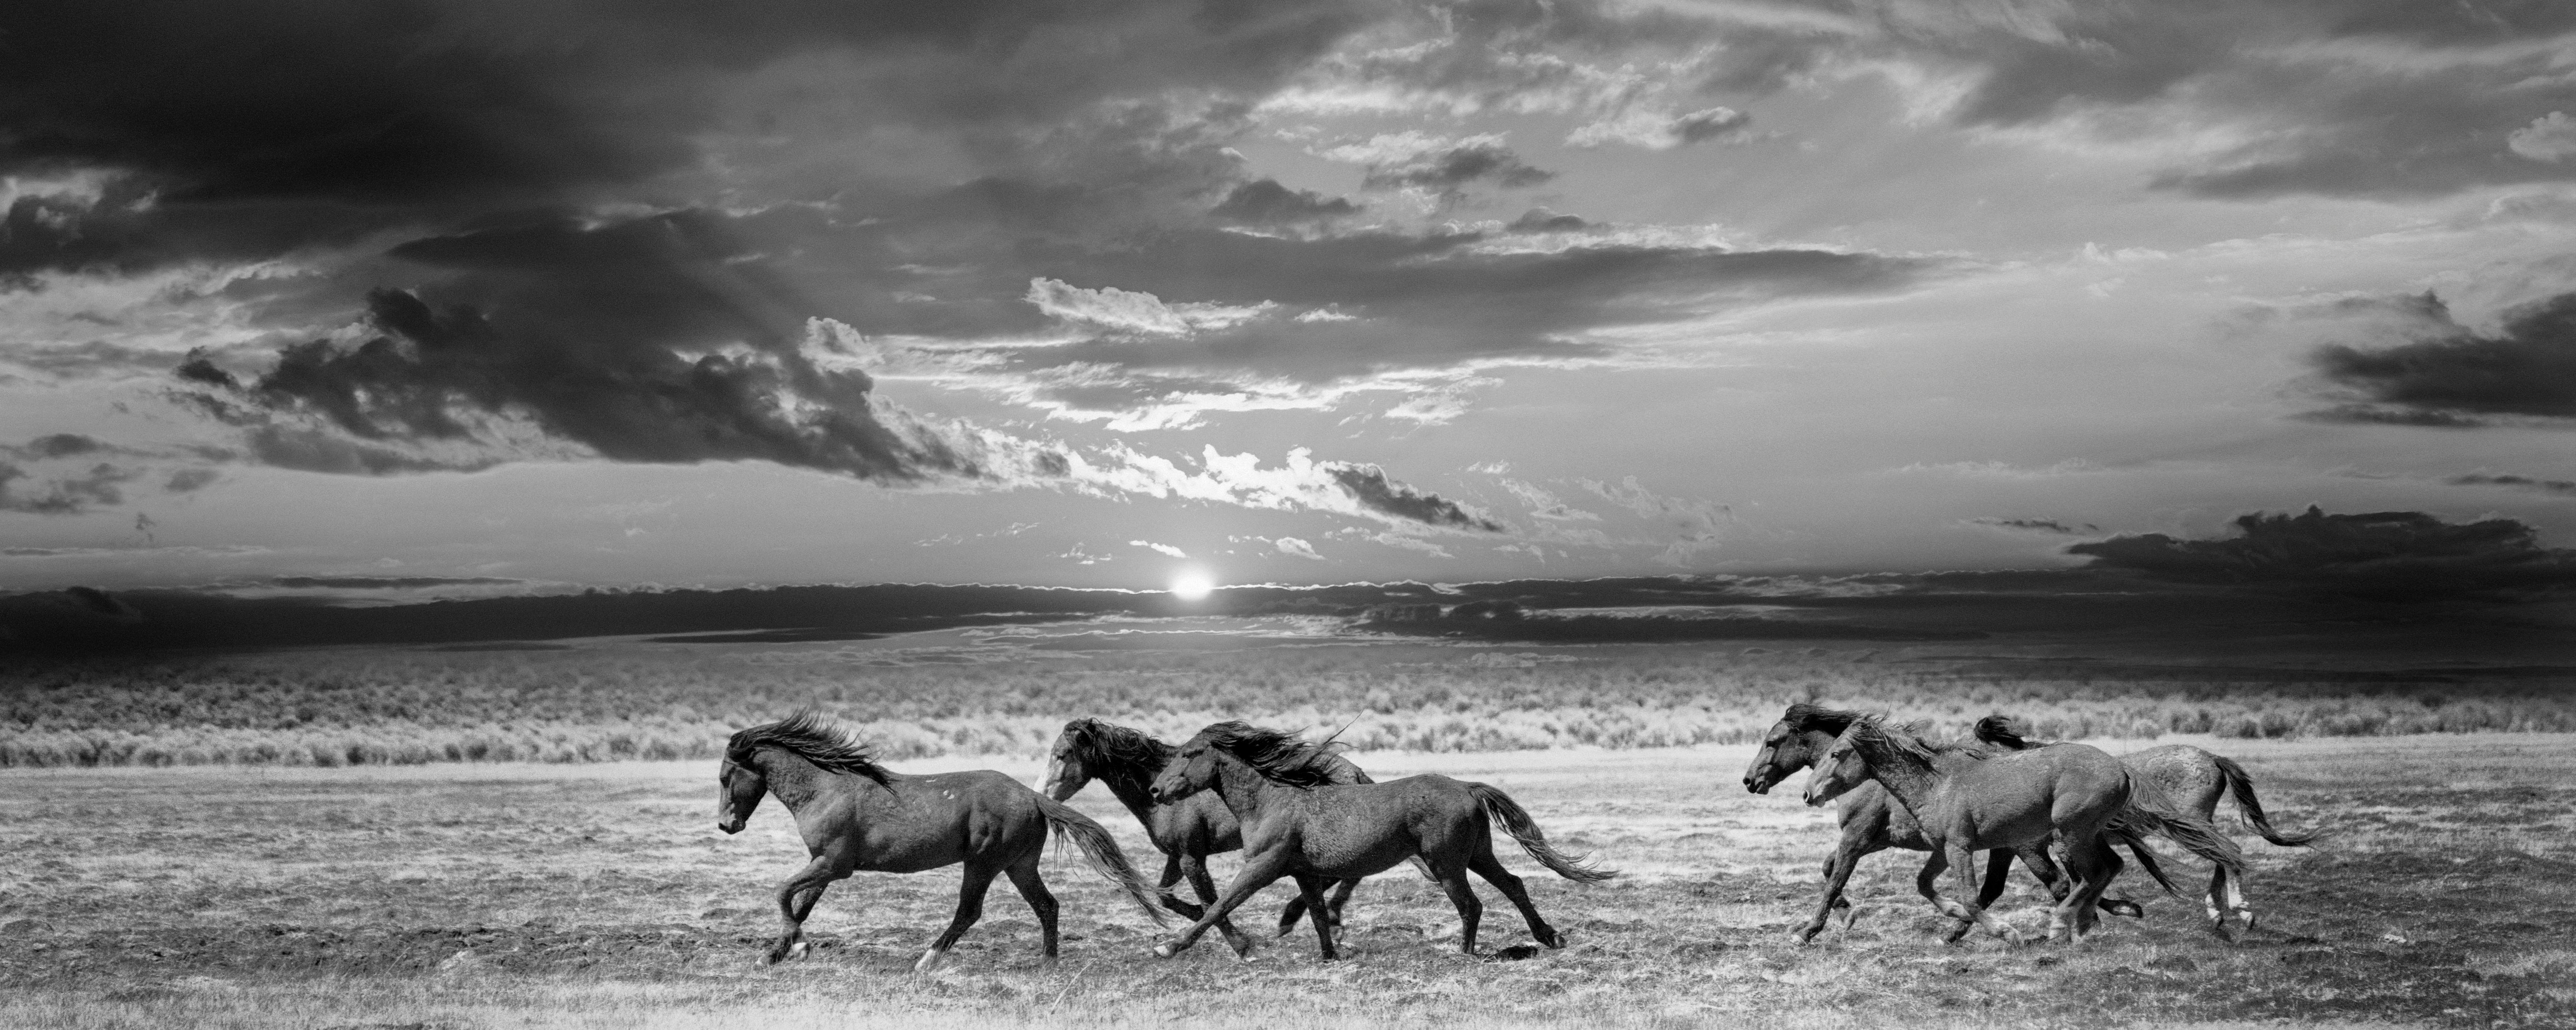 Shane Russeck Landscape Photograph - Chasing the Light  48x120 B&W Photography Wild Horses Mustangs Photograph